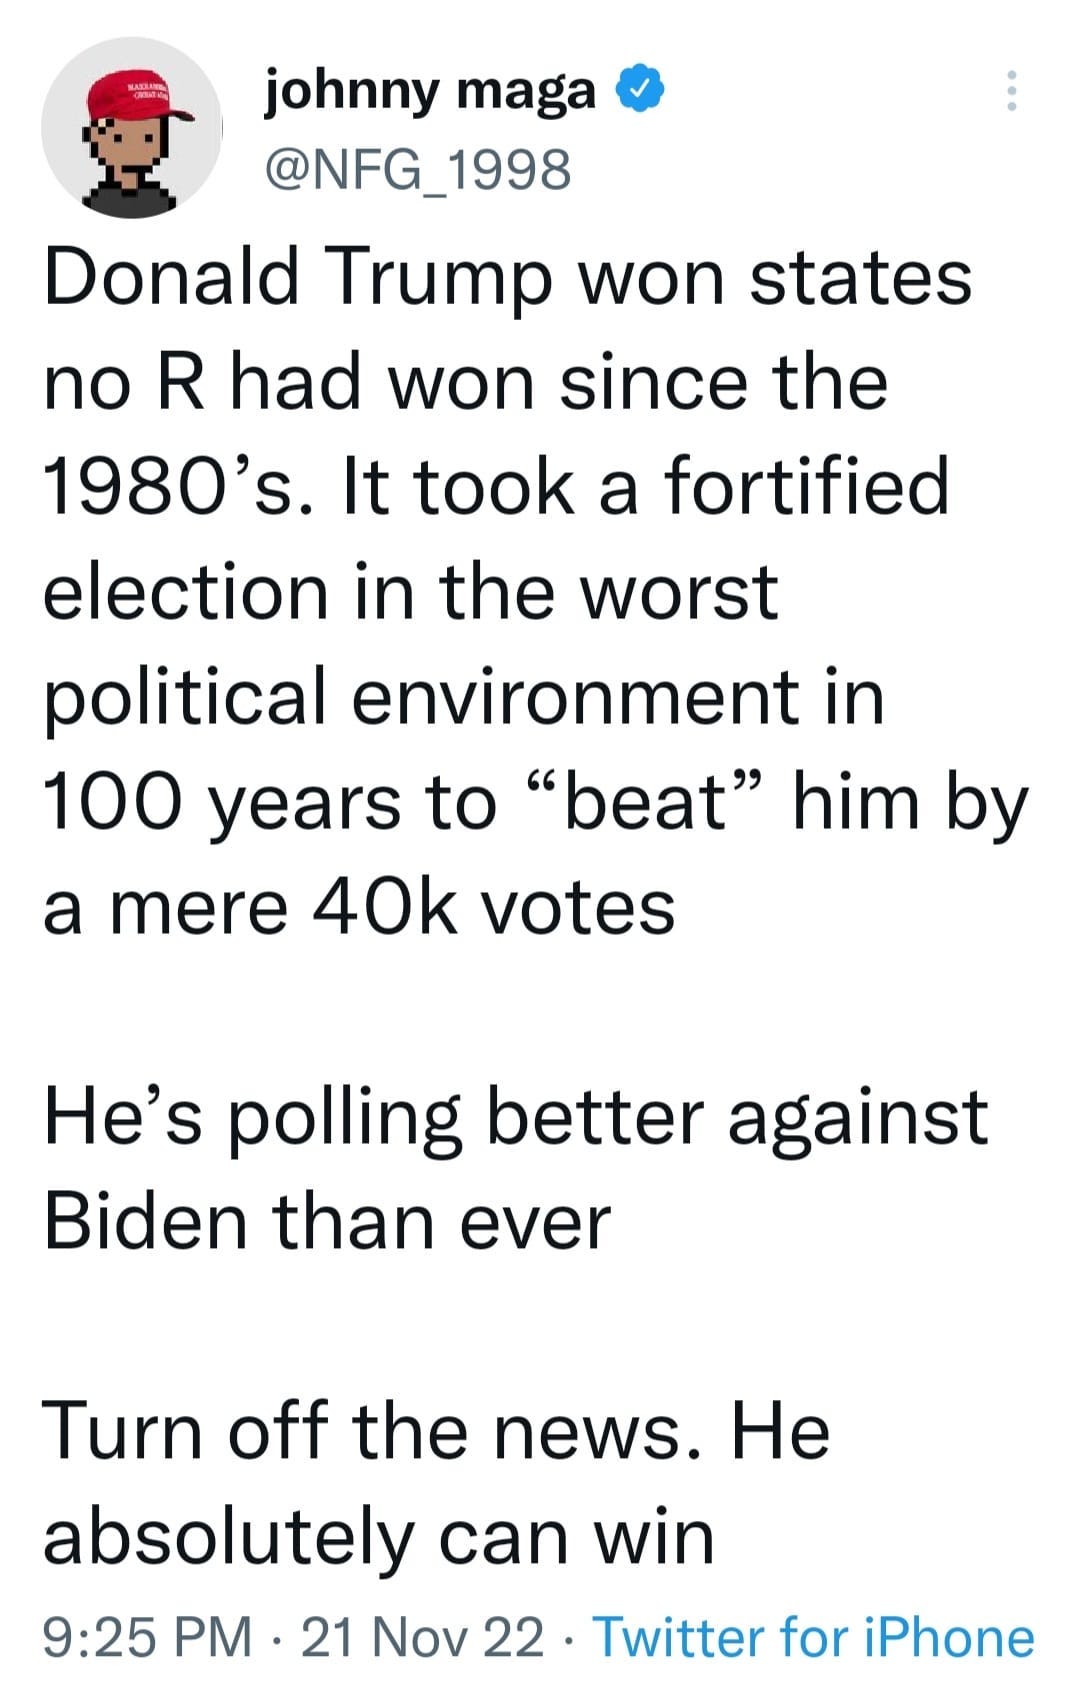 May be an image of text that says 'johnny maga @NFG_1998 Donald Trump won states no R had won since the 1980's. It took a fortified election in the worst political environment in 100 years to "beat" him by a mere 40k votes He's polling better against Biden than ever Turn off the news. He absolutely can win 9:25 PM. 21 Nov 22 Twitter for iPhone'